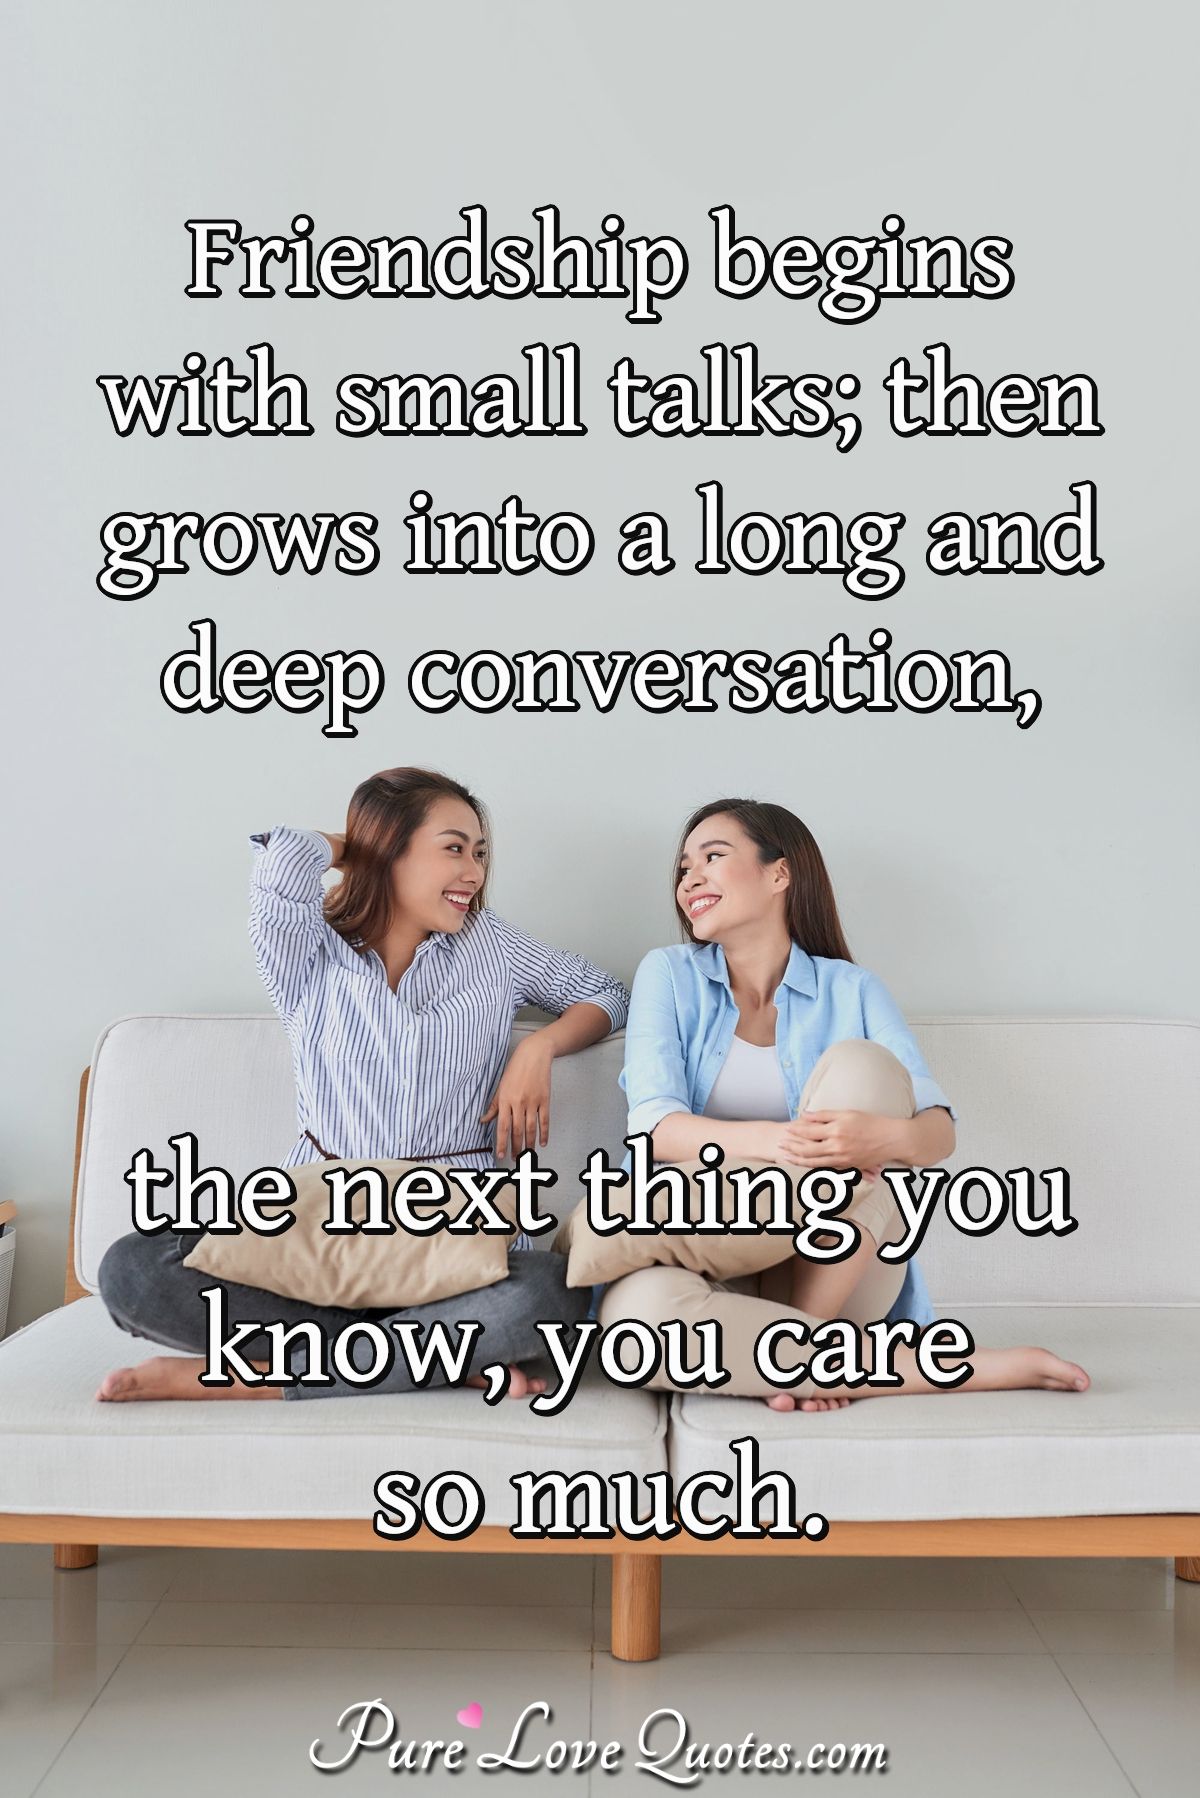 Friendship begins with small talks; then grows into a long and deep conversation, the next thing you know, you care so much. - Anonymous